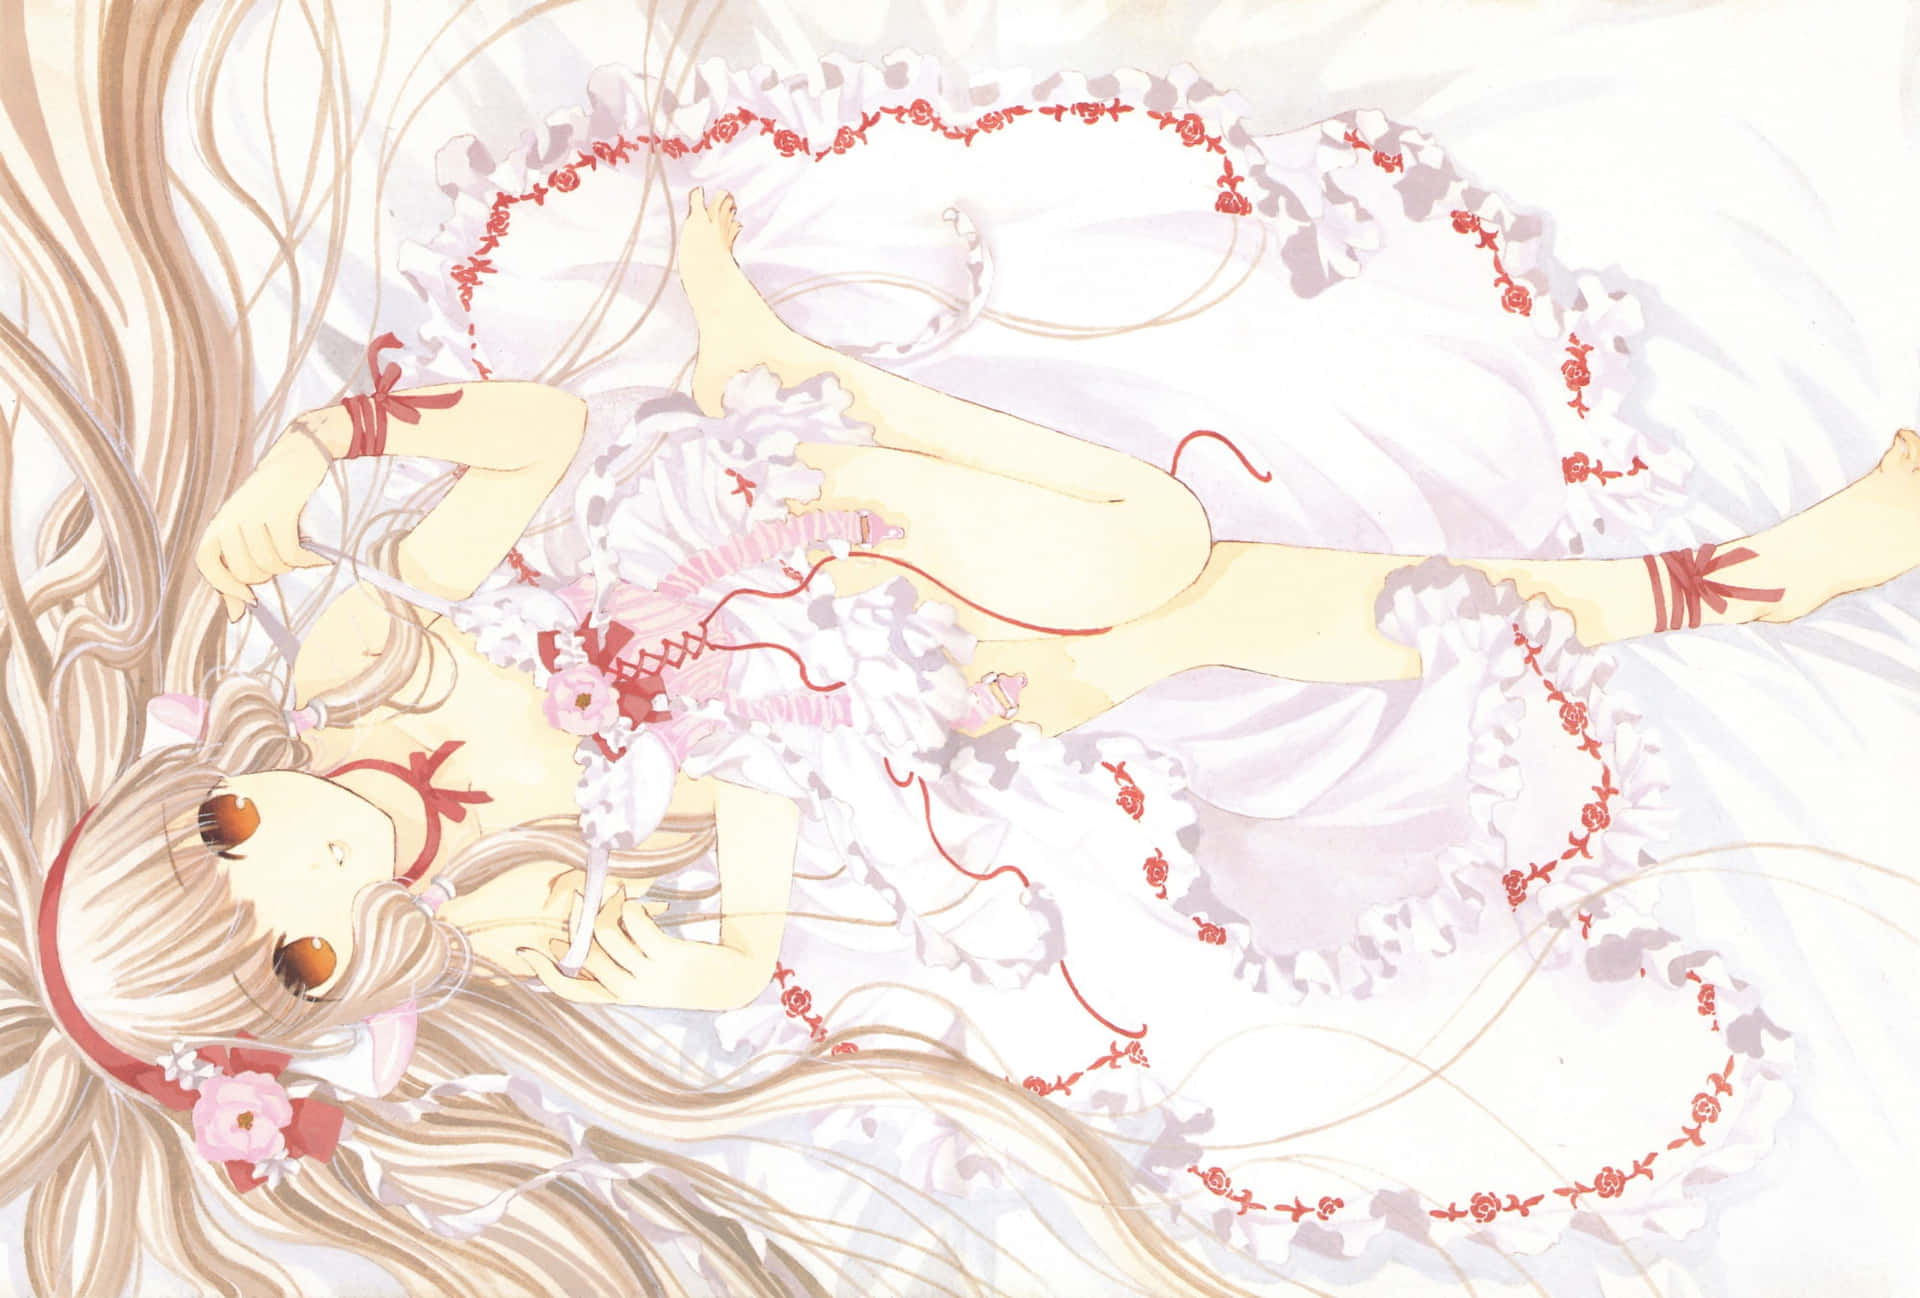 A loving embrace between two Chobits